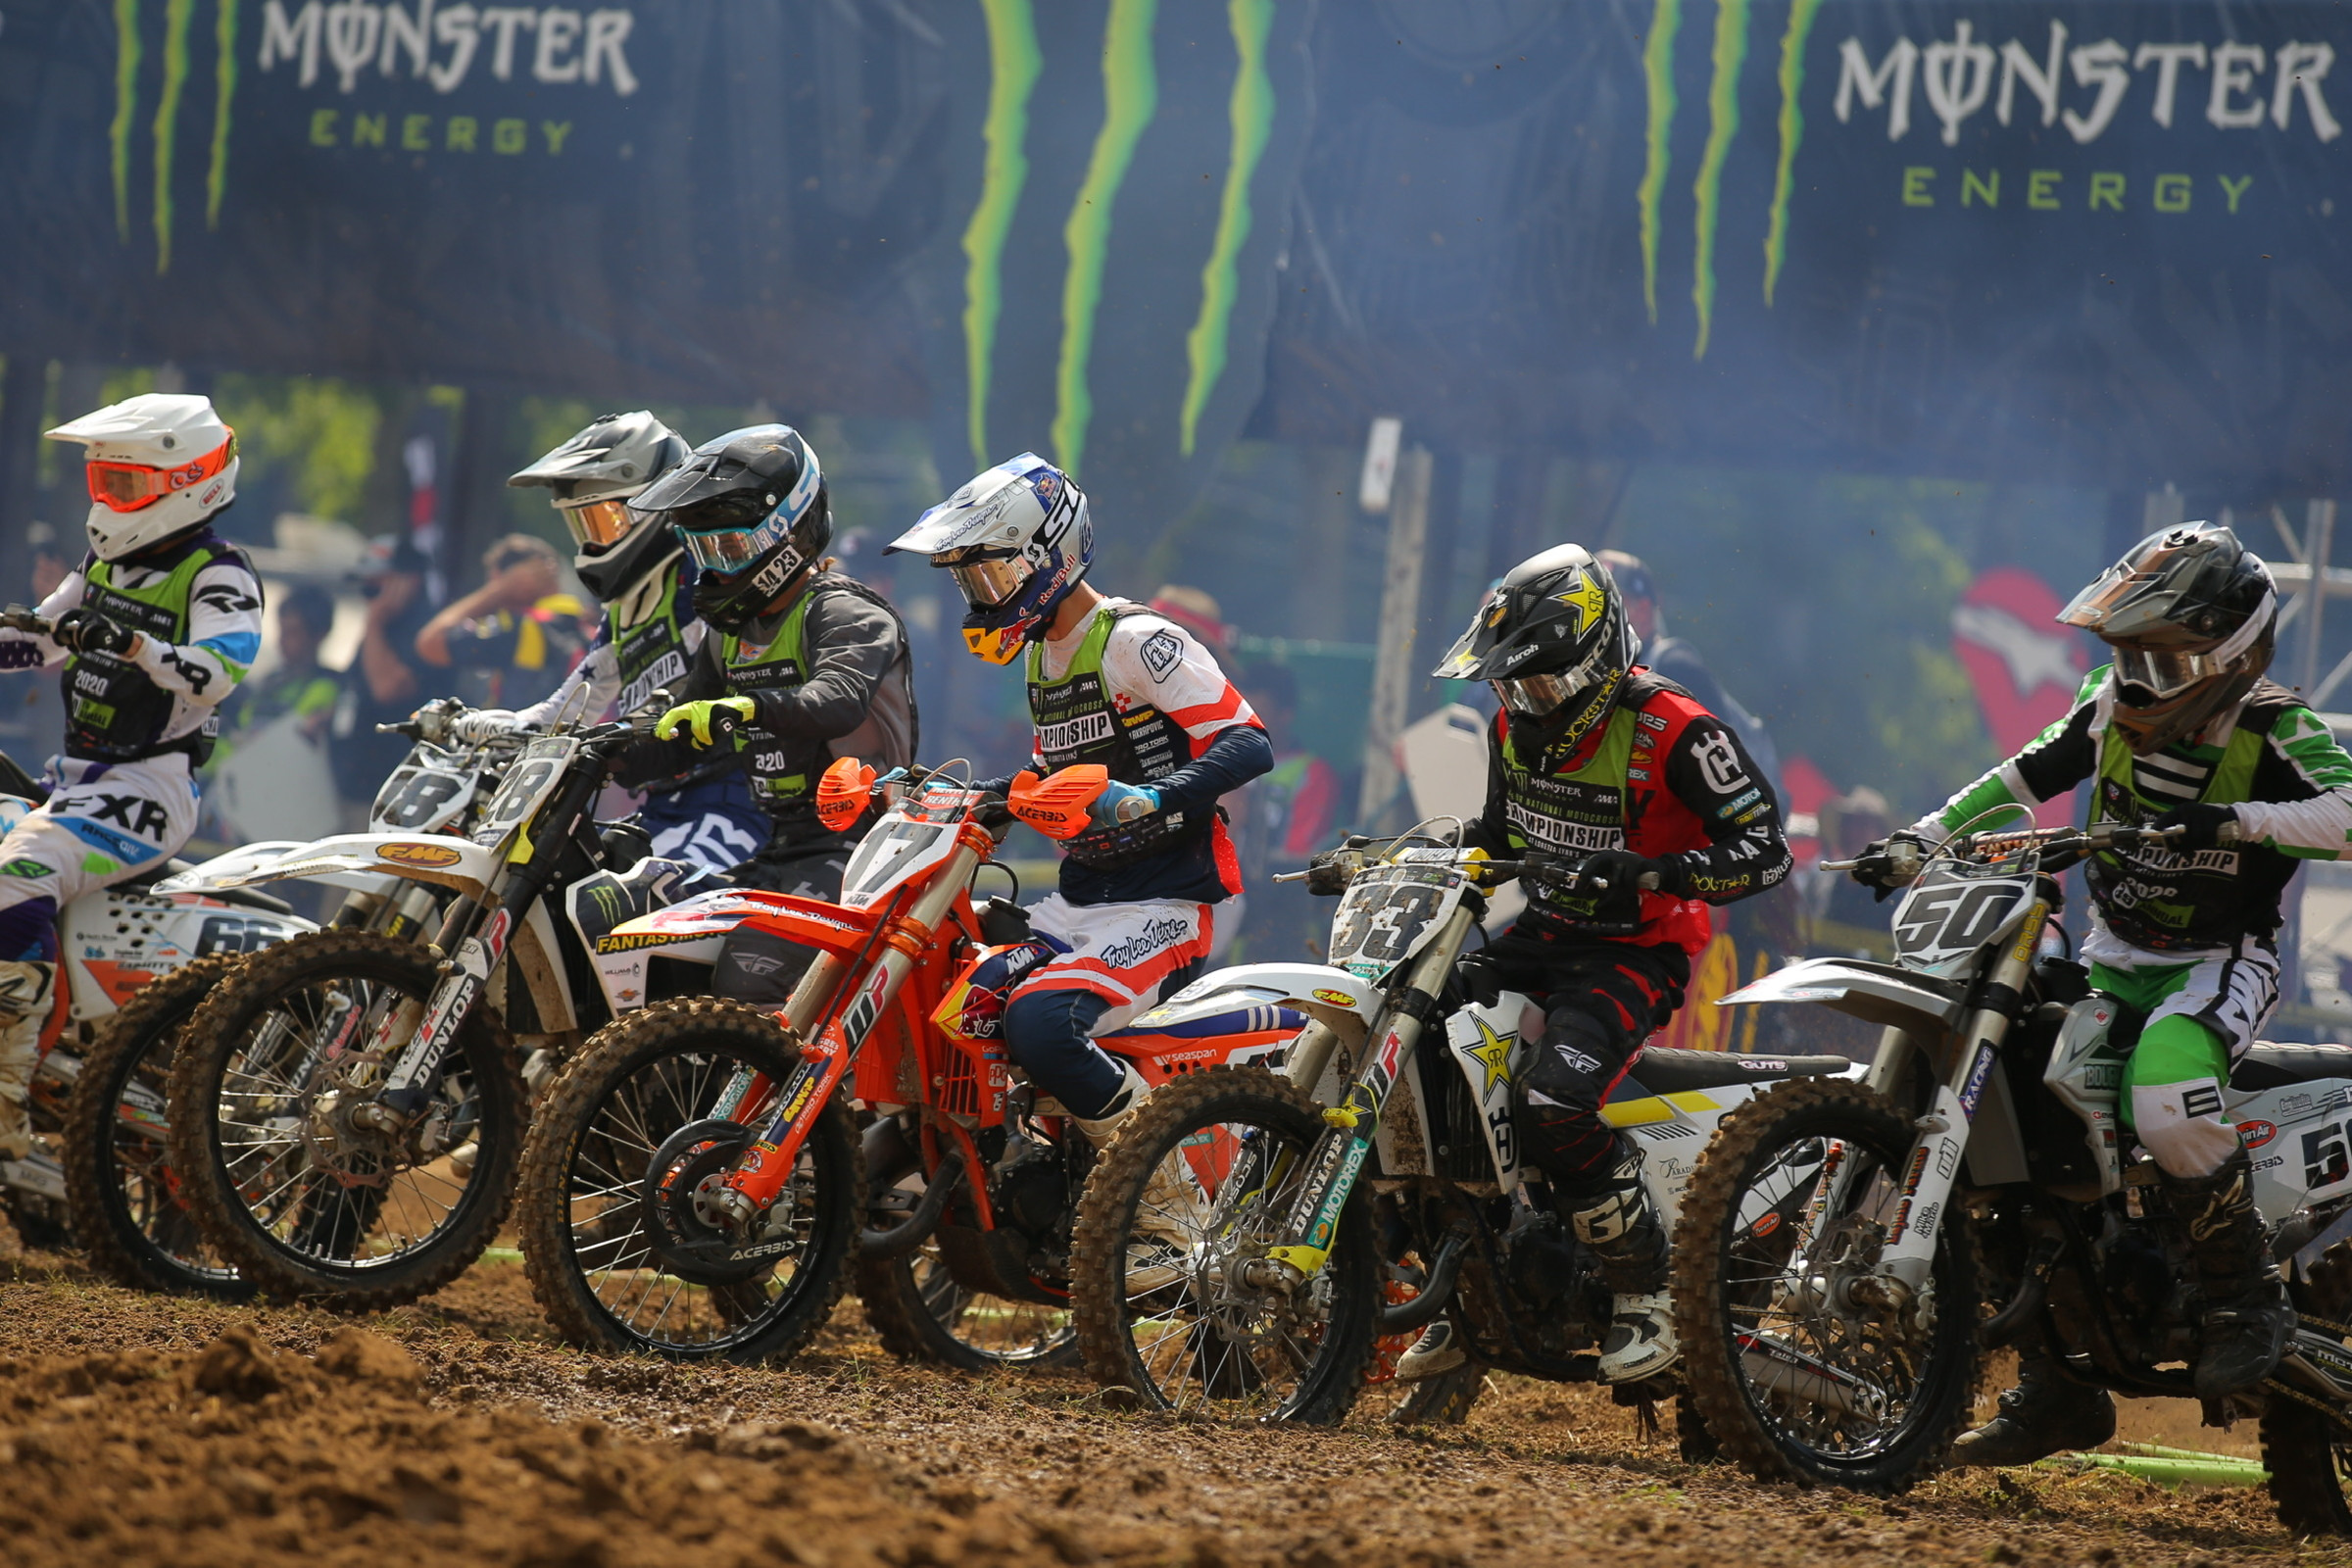 2020 MXGP of Latvia and AMA Amateur National Motocross Championship Live Stream Schedule